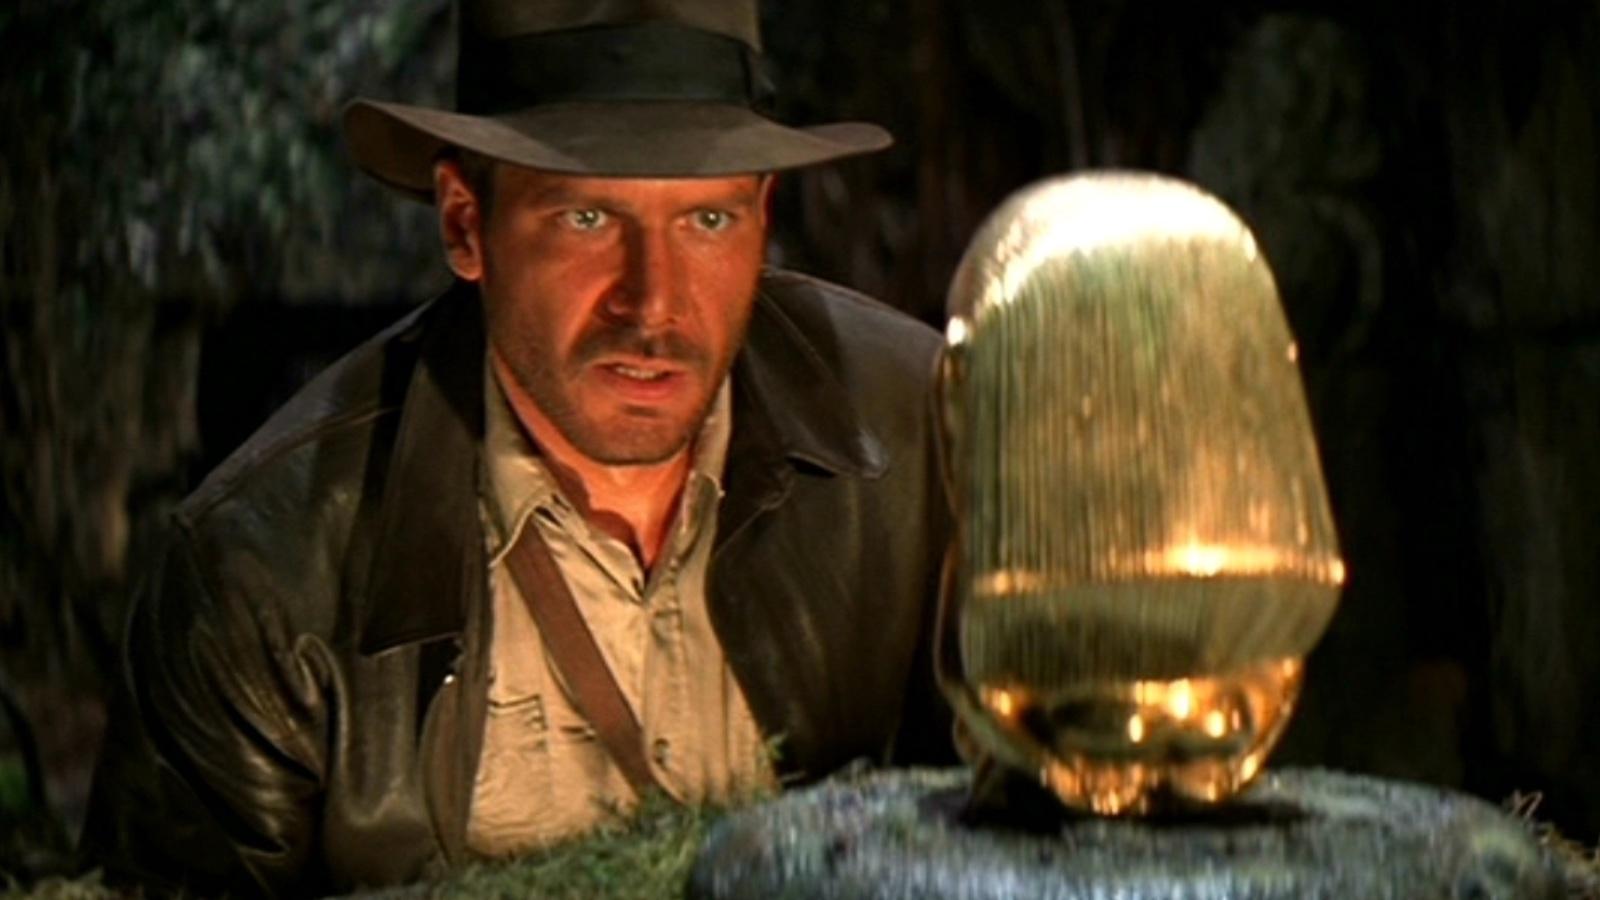 Indiana Jones and Raiders of the Lost Ark with Harrison Ford